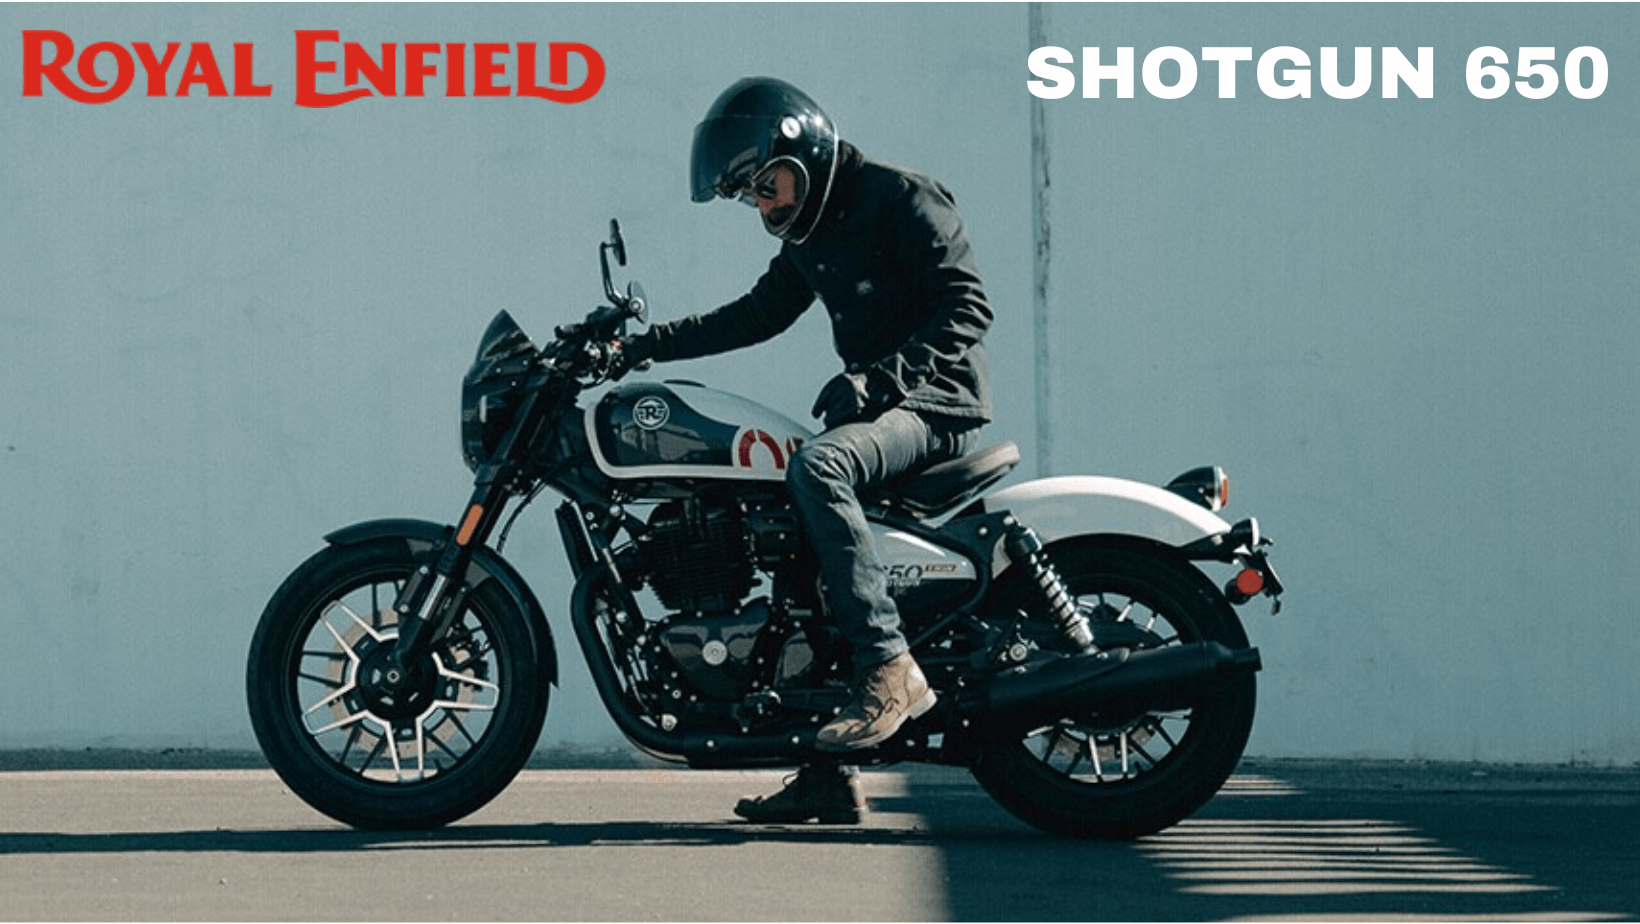 Royal Enfield Expands Global Reach with Shotgun 650 Shipping to Europe news